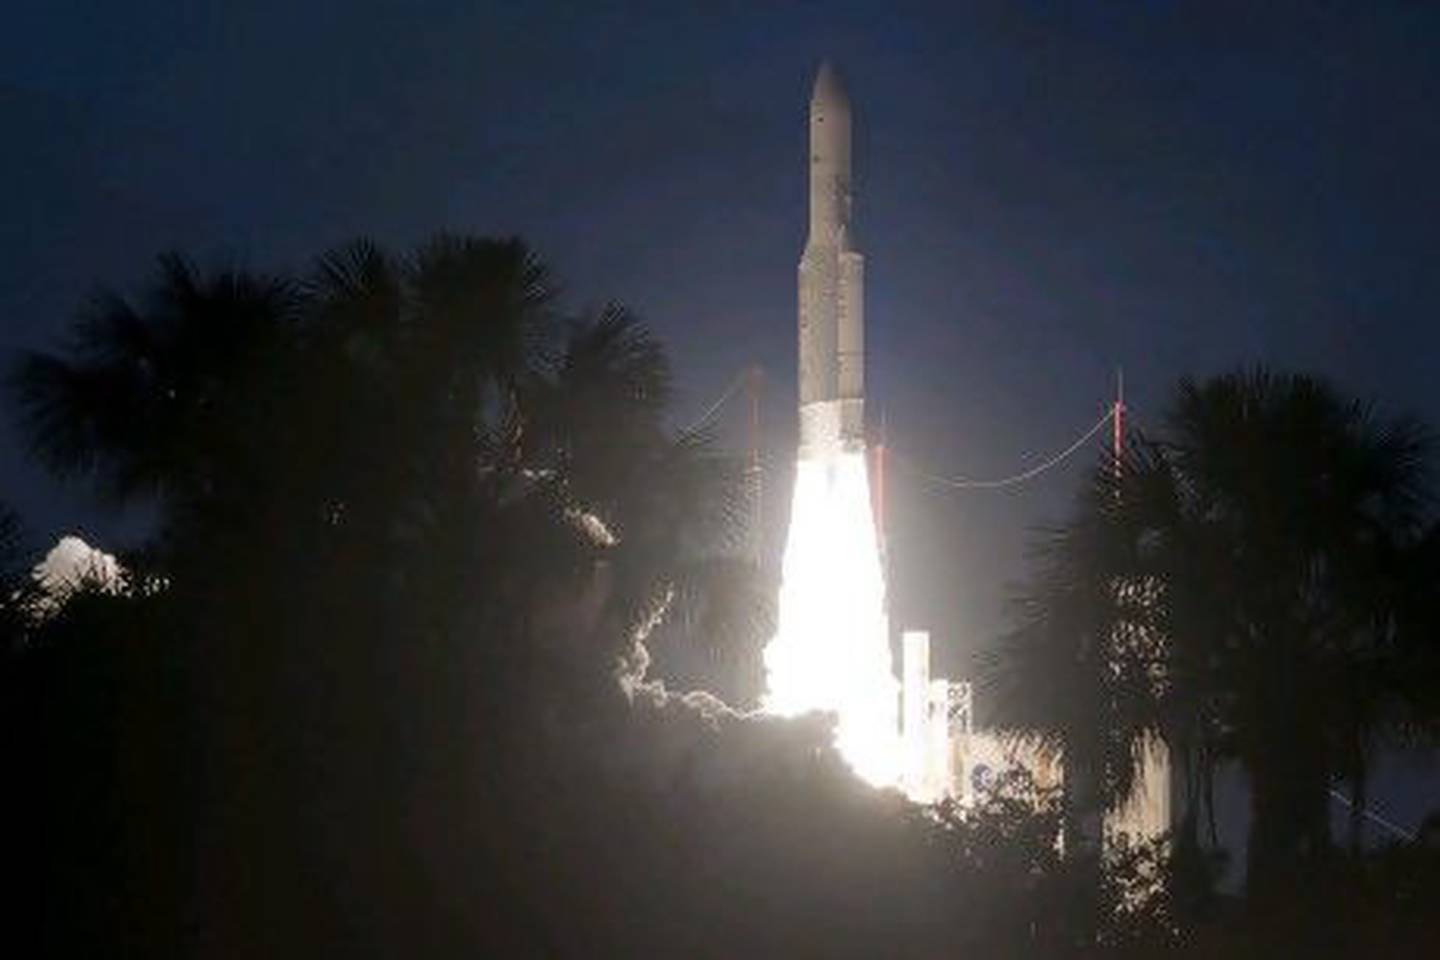 An Ariane 5 rocket takes off from French Guiana. AFP / ESA